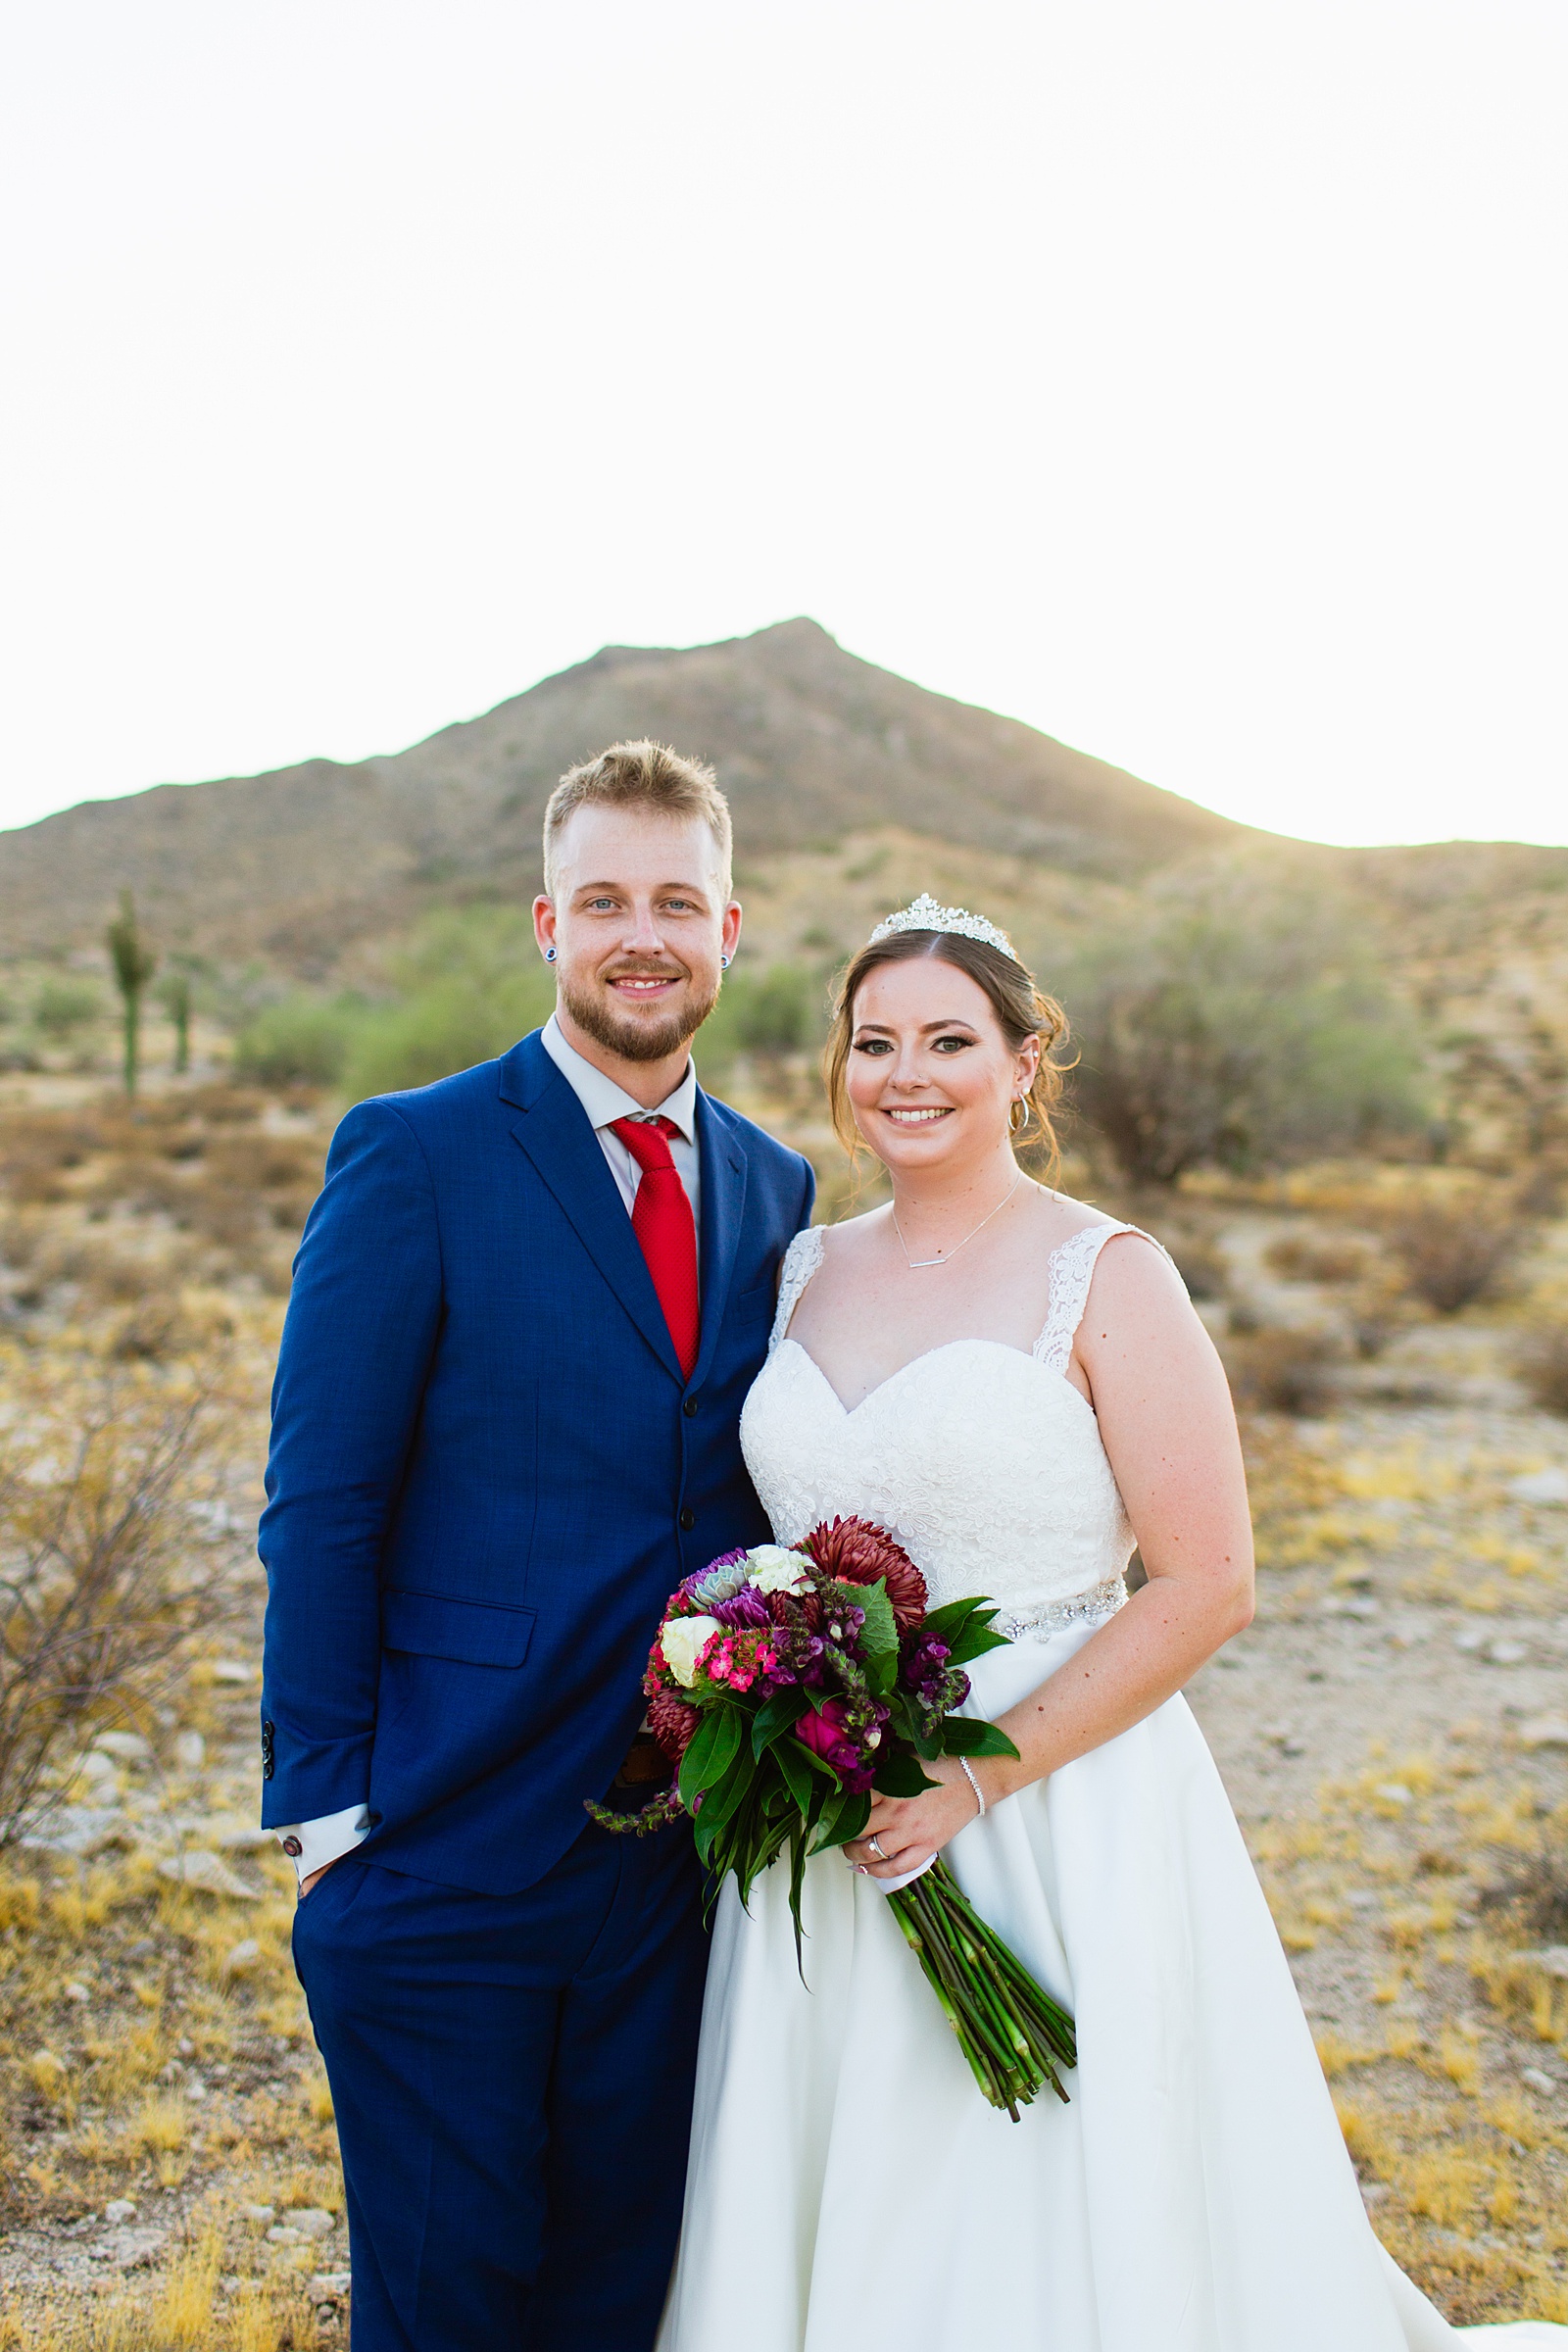 Bride and groom pose for their intimate desert wedding by Phoenix wedding photographer Juniper and Co Photography.